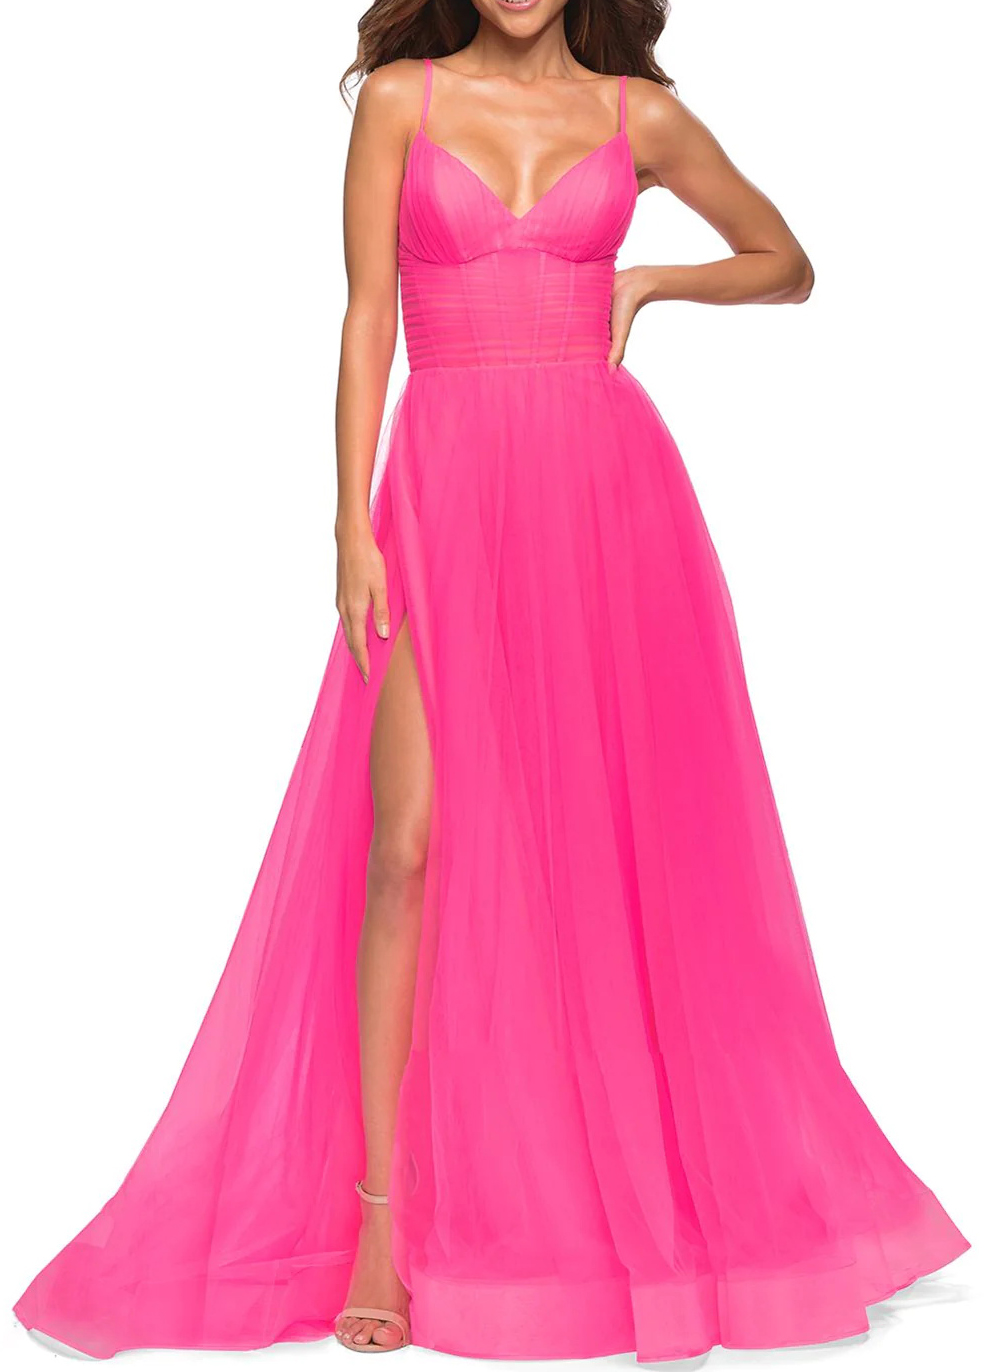 Hot Pink Princess Tulle Prom Dresses 